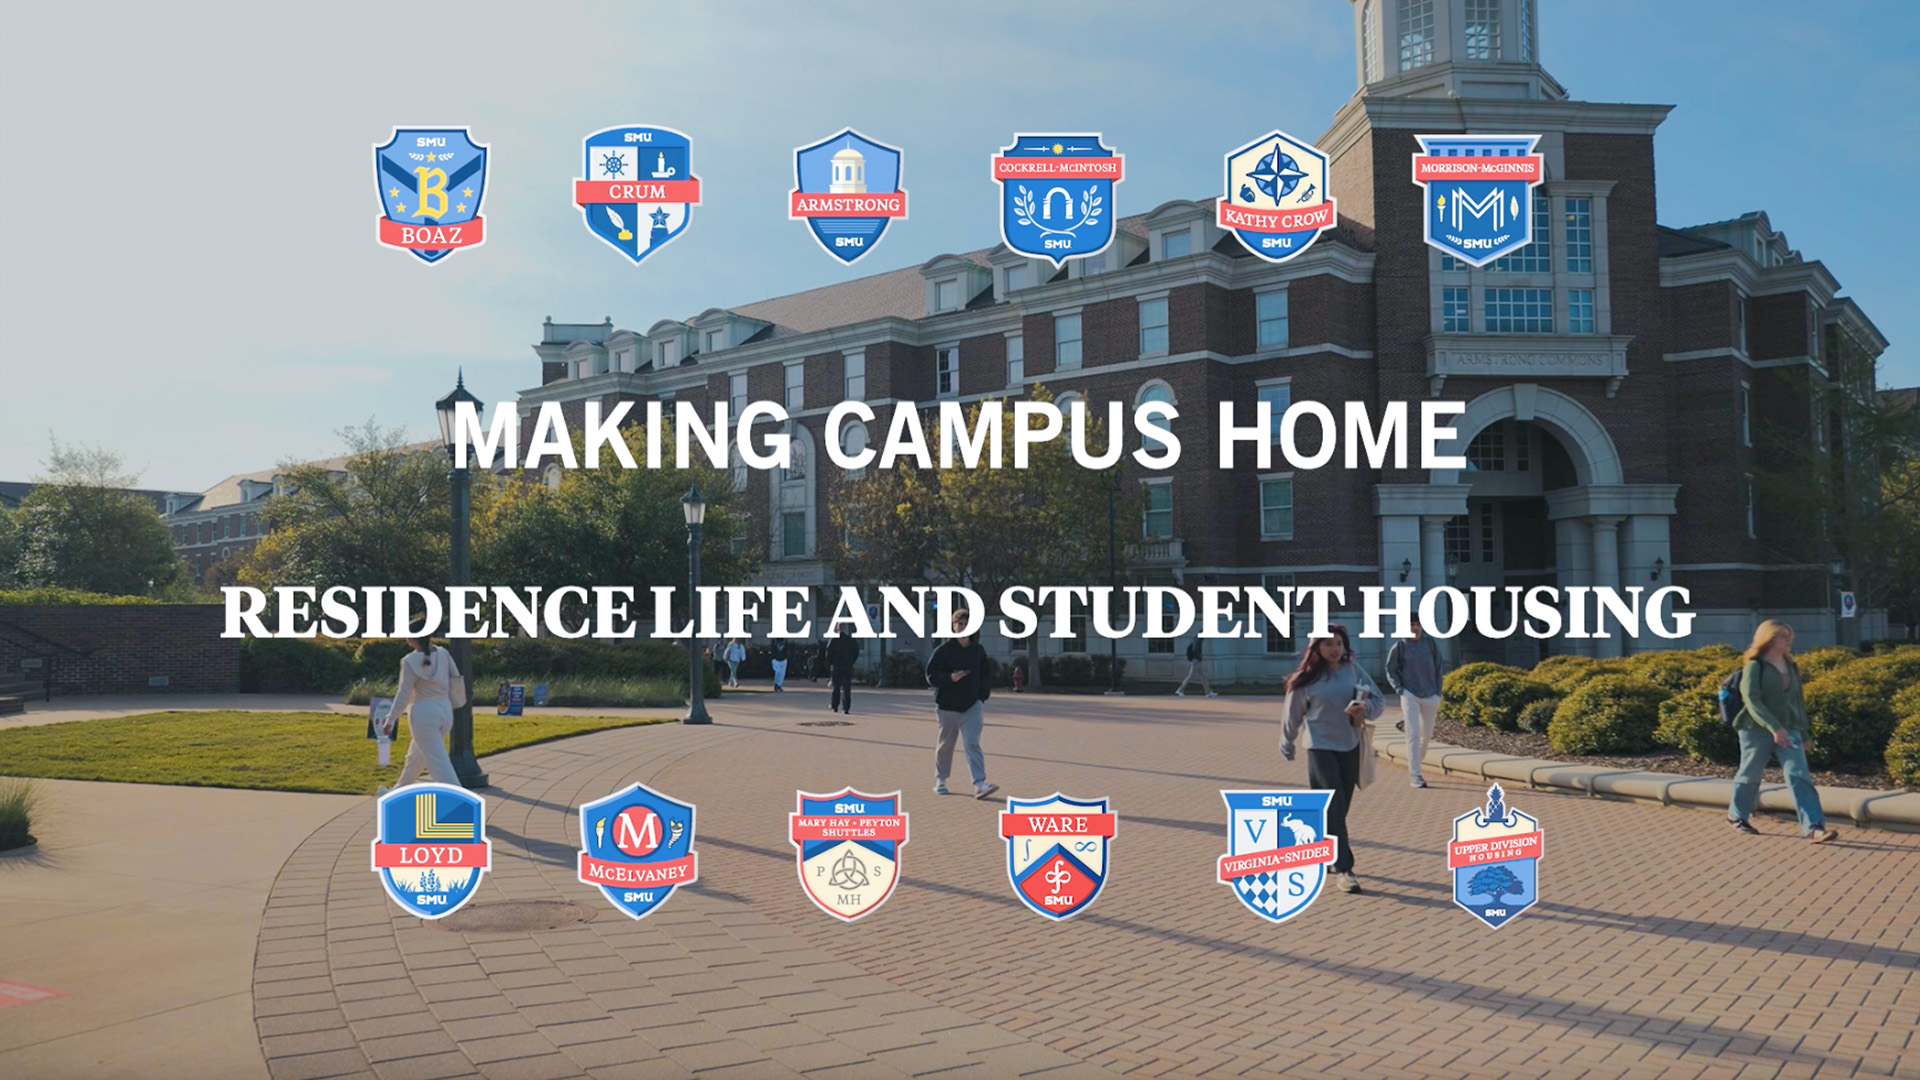 image of Armstrong Commons with the Commons Crests and "Making Campus Home - Residence Life and Student Housing" in white text over image